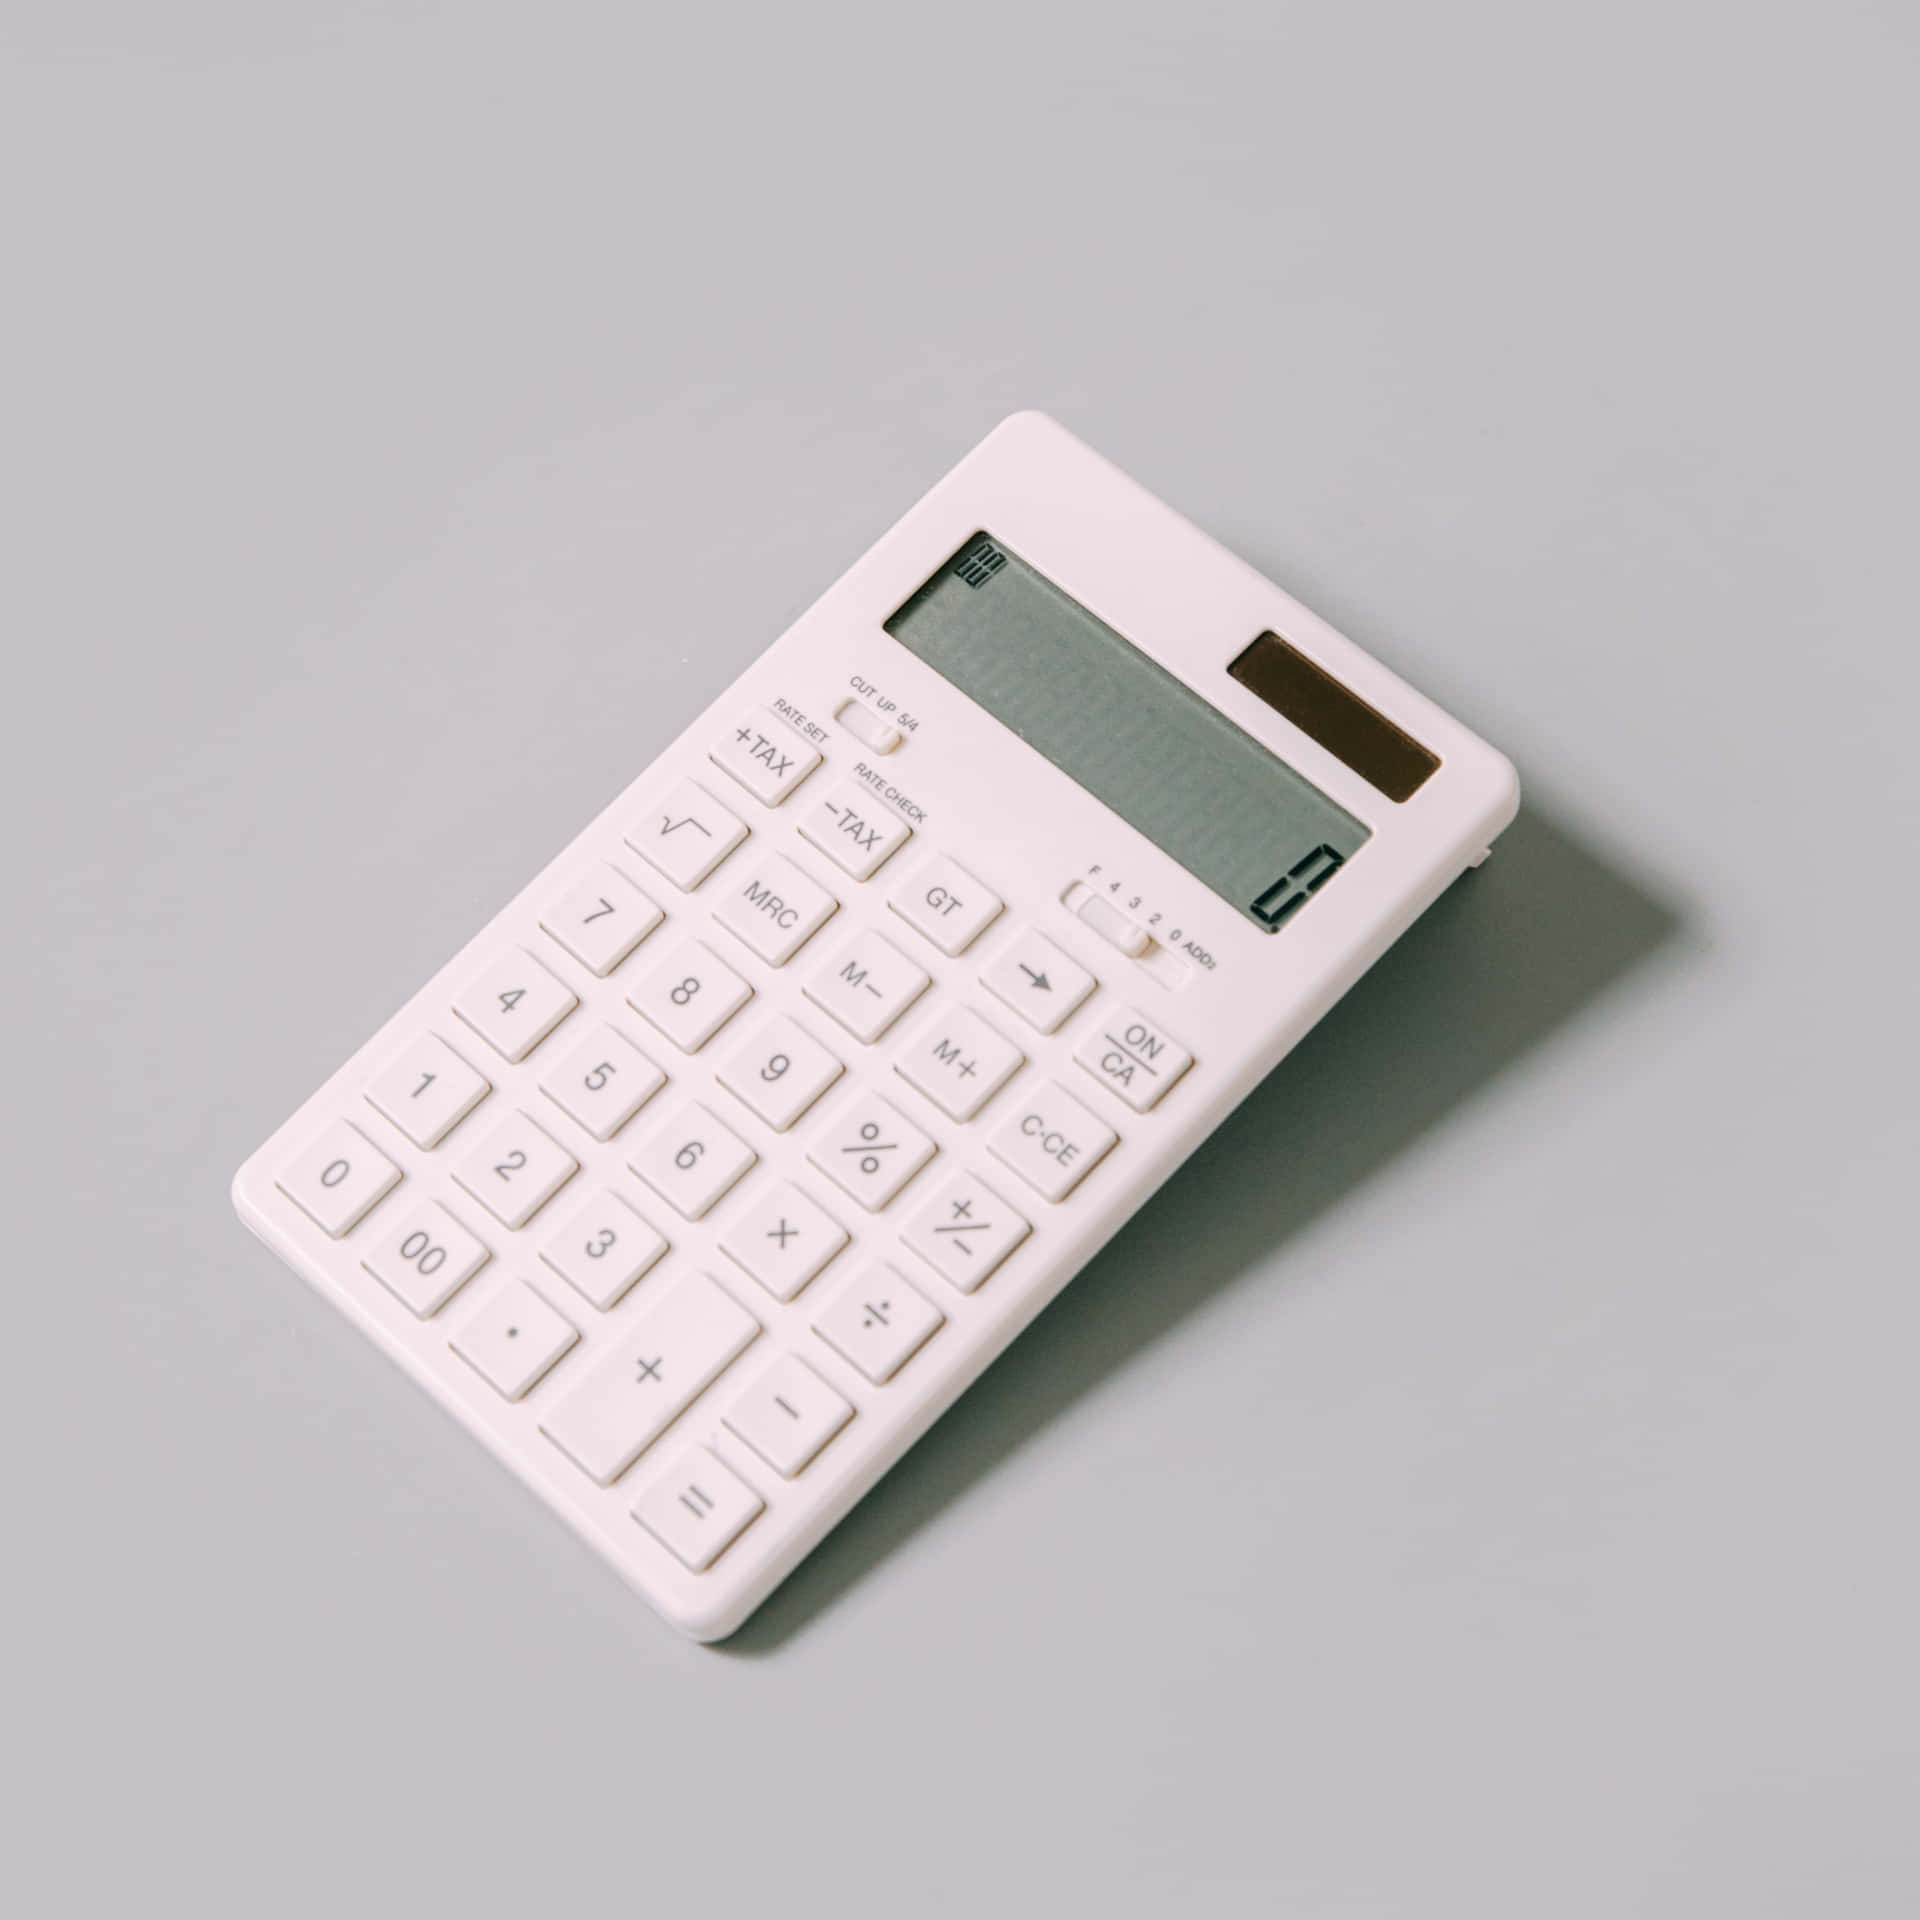 Calculator on a wooden table in the spotlight